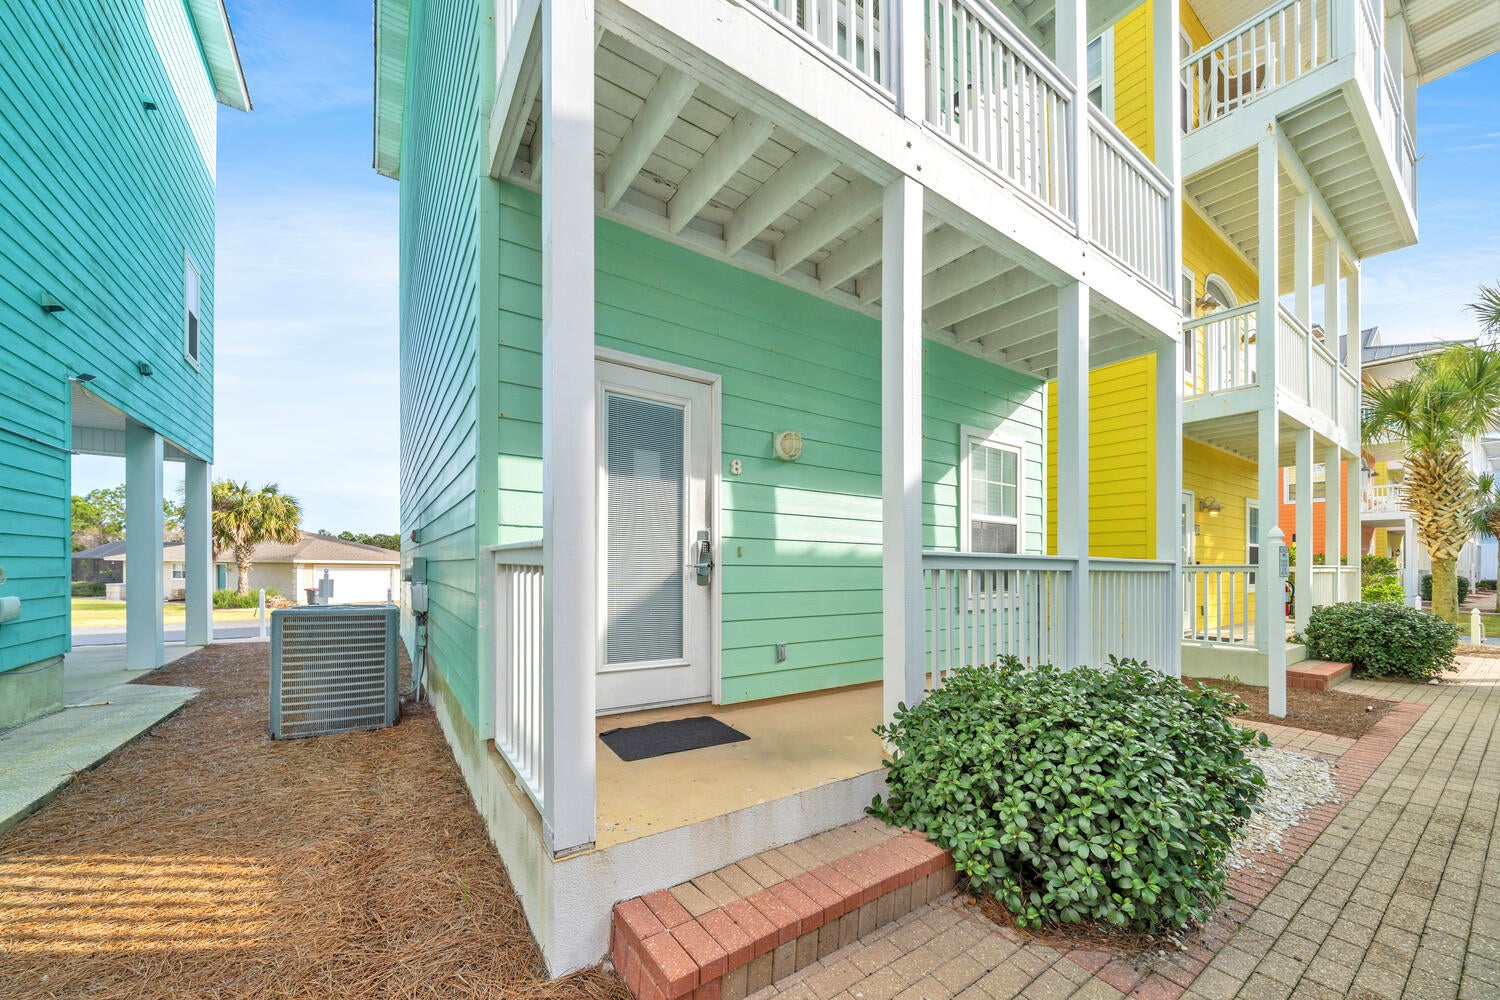 Welcome to Summer Towne Cottages #8 - Sea-Questered